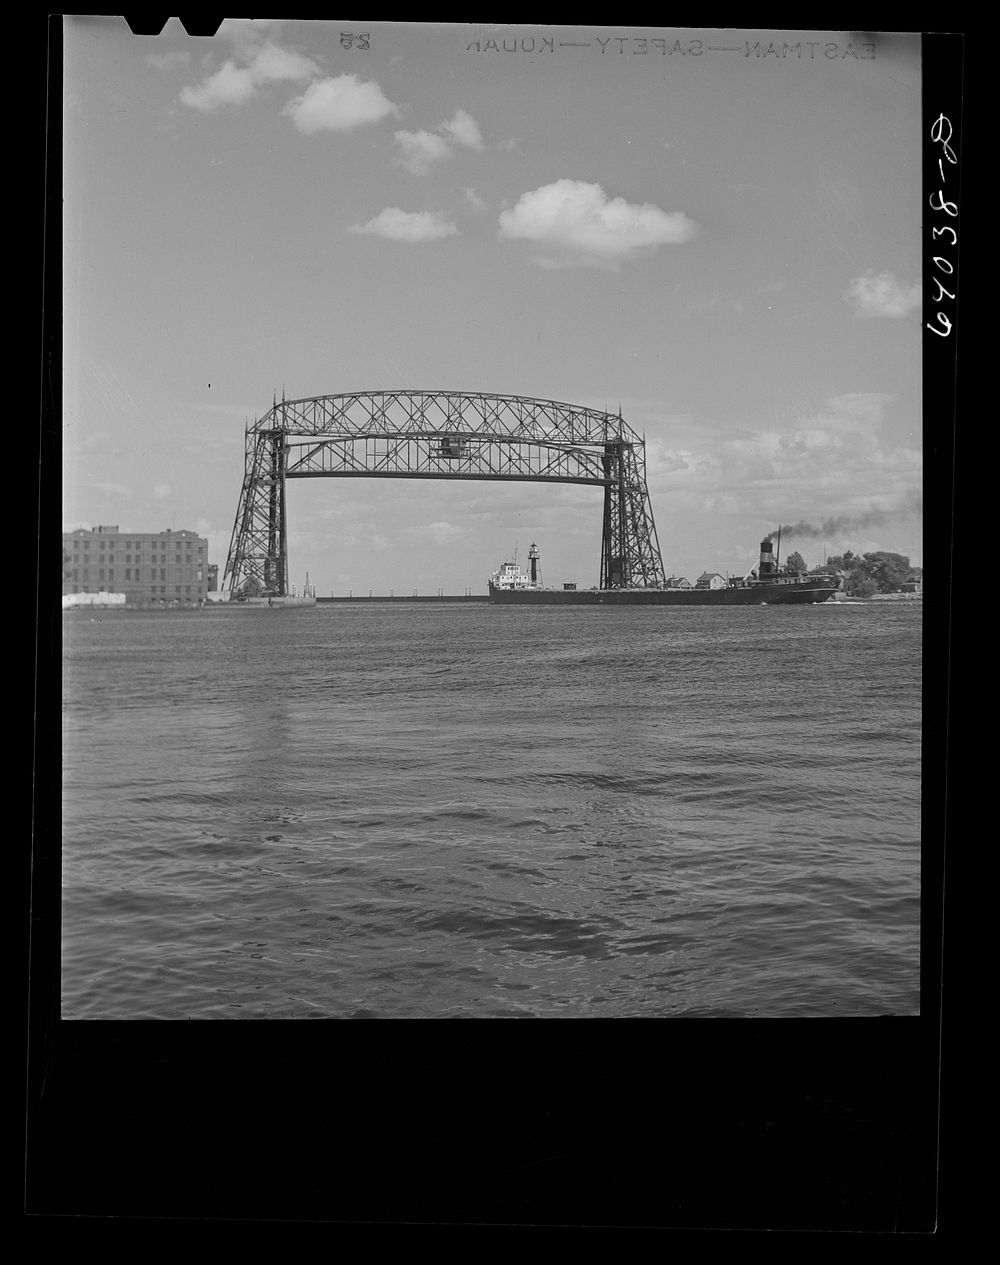 Aerial bridge. Duluth, Minnesota. Sourced from the Library of Congress.